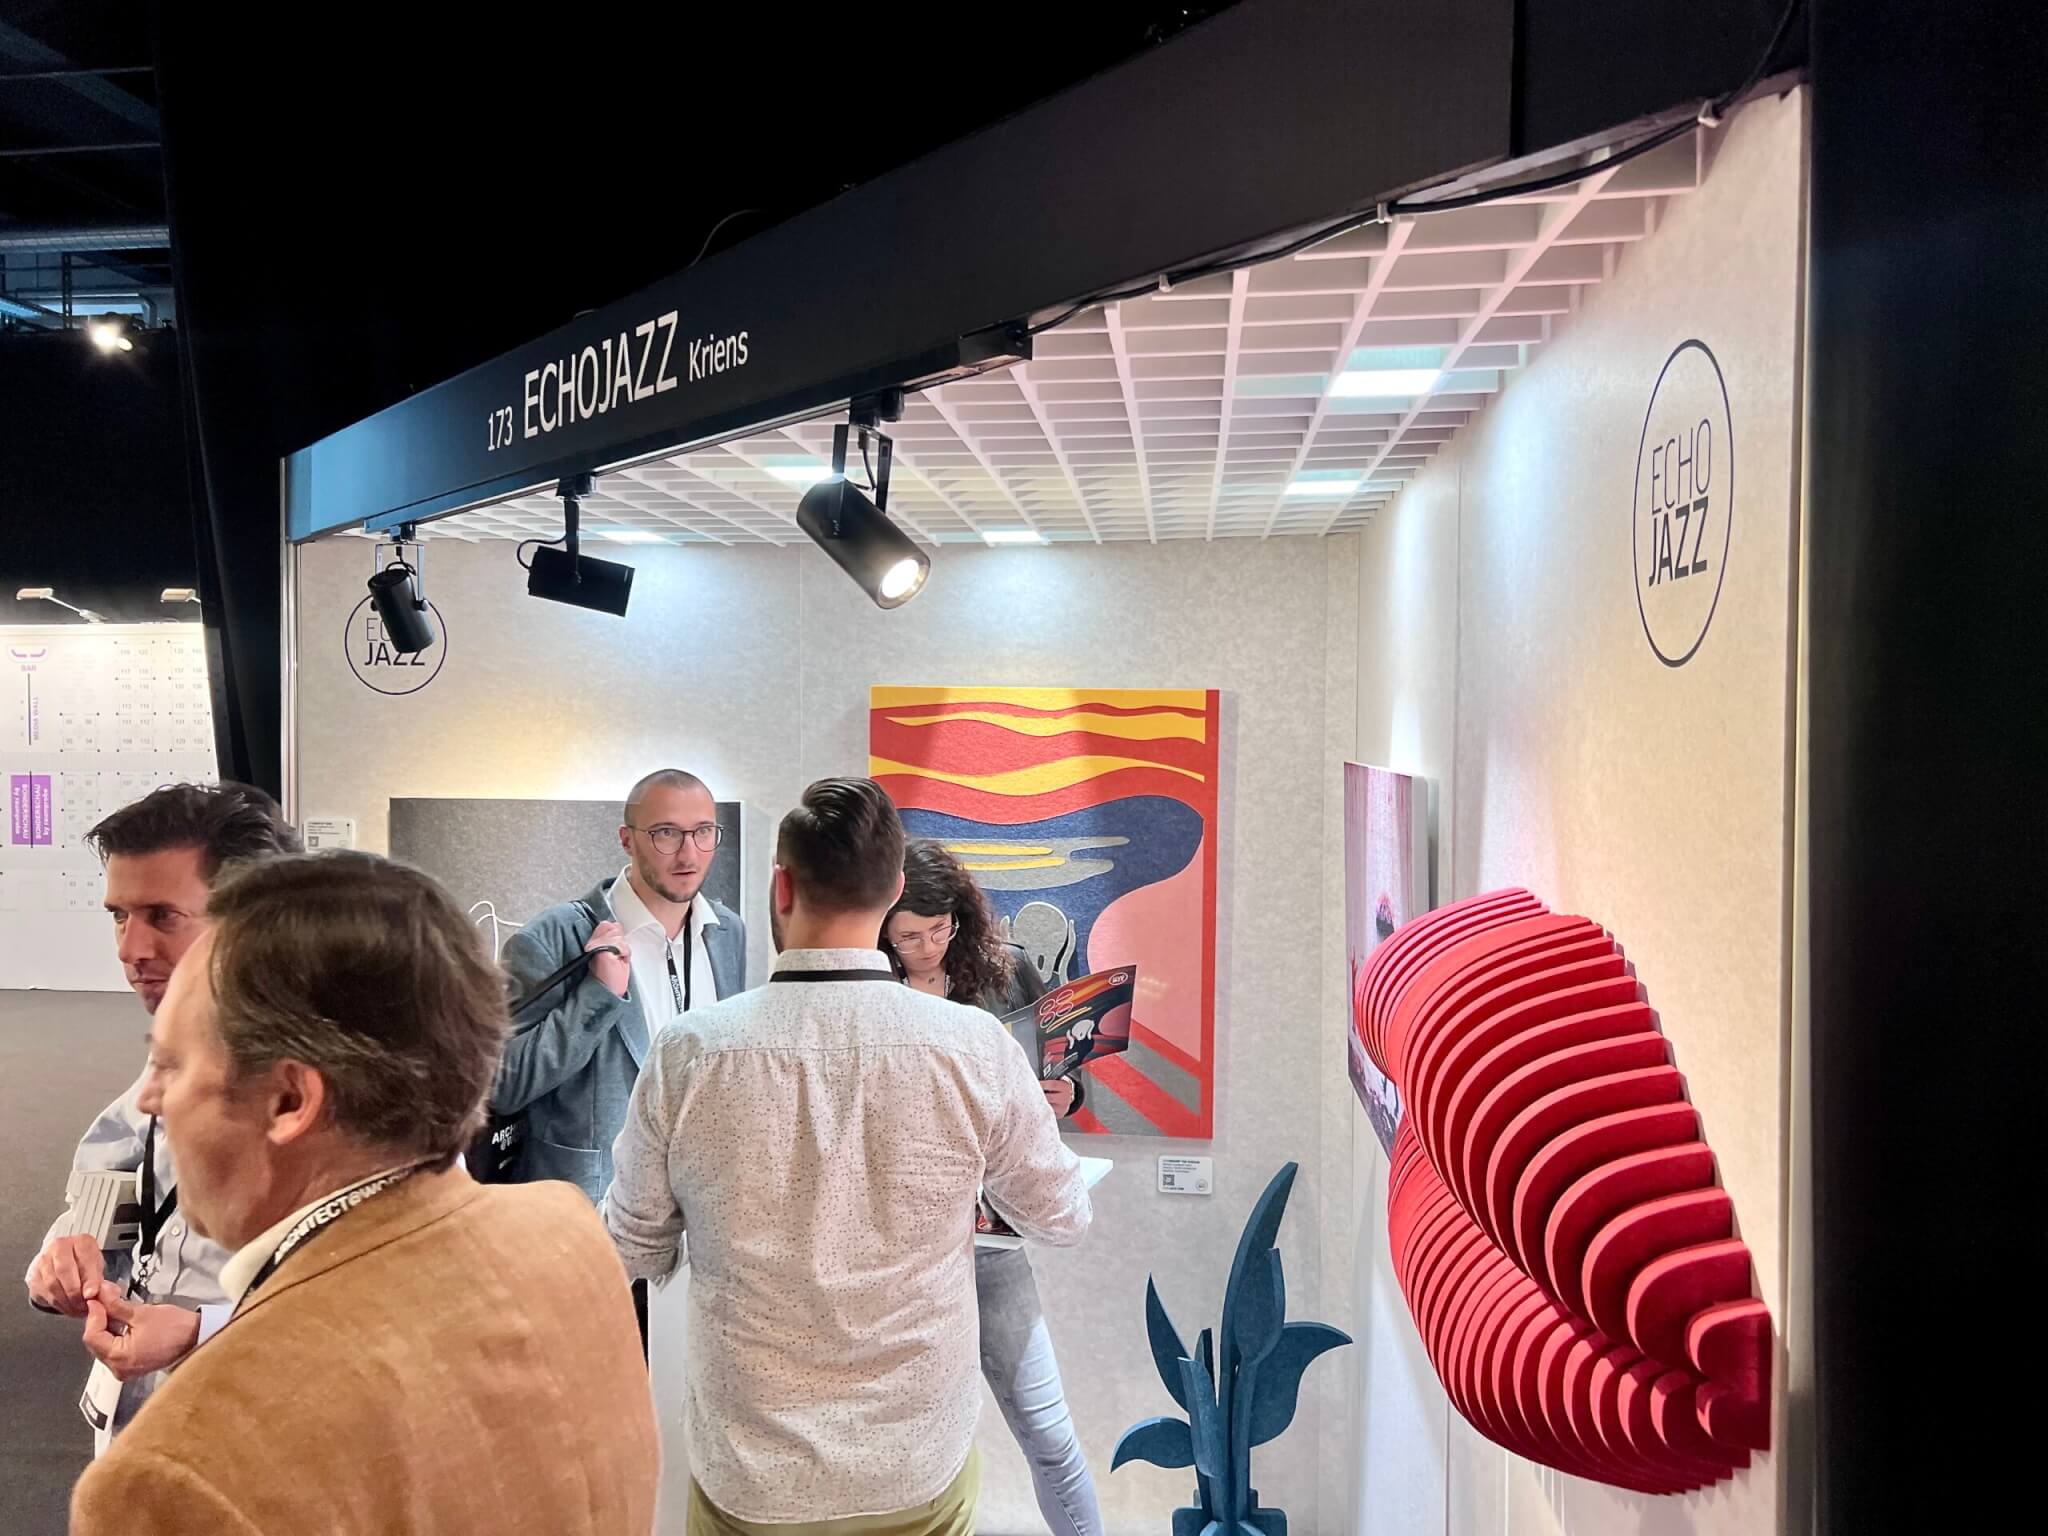 ECHOJAZZ Artcoustic Inspiration booth at ARCHITECT@WORK Zürich 2023 showing acoustic pieces of art